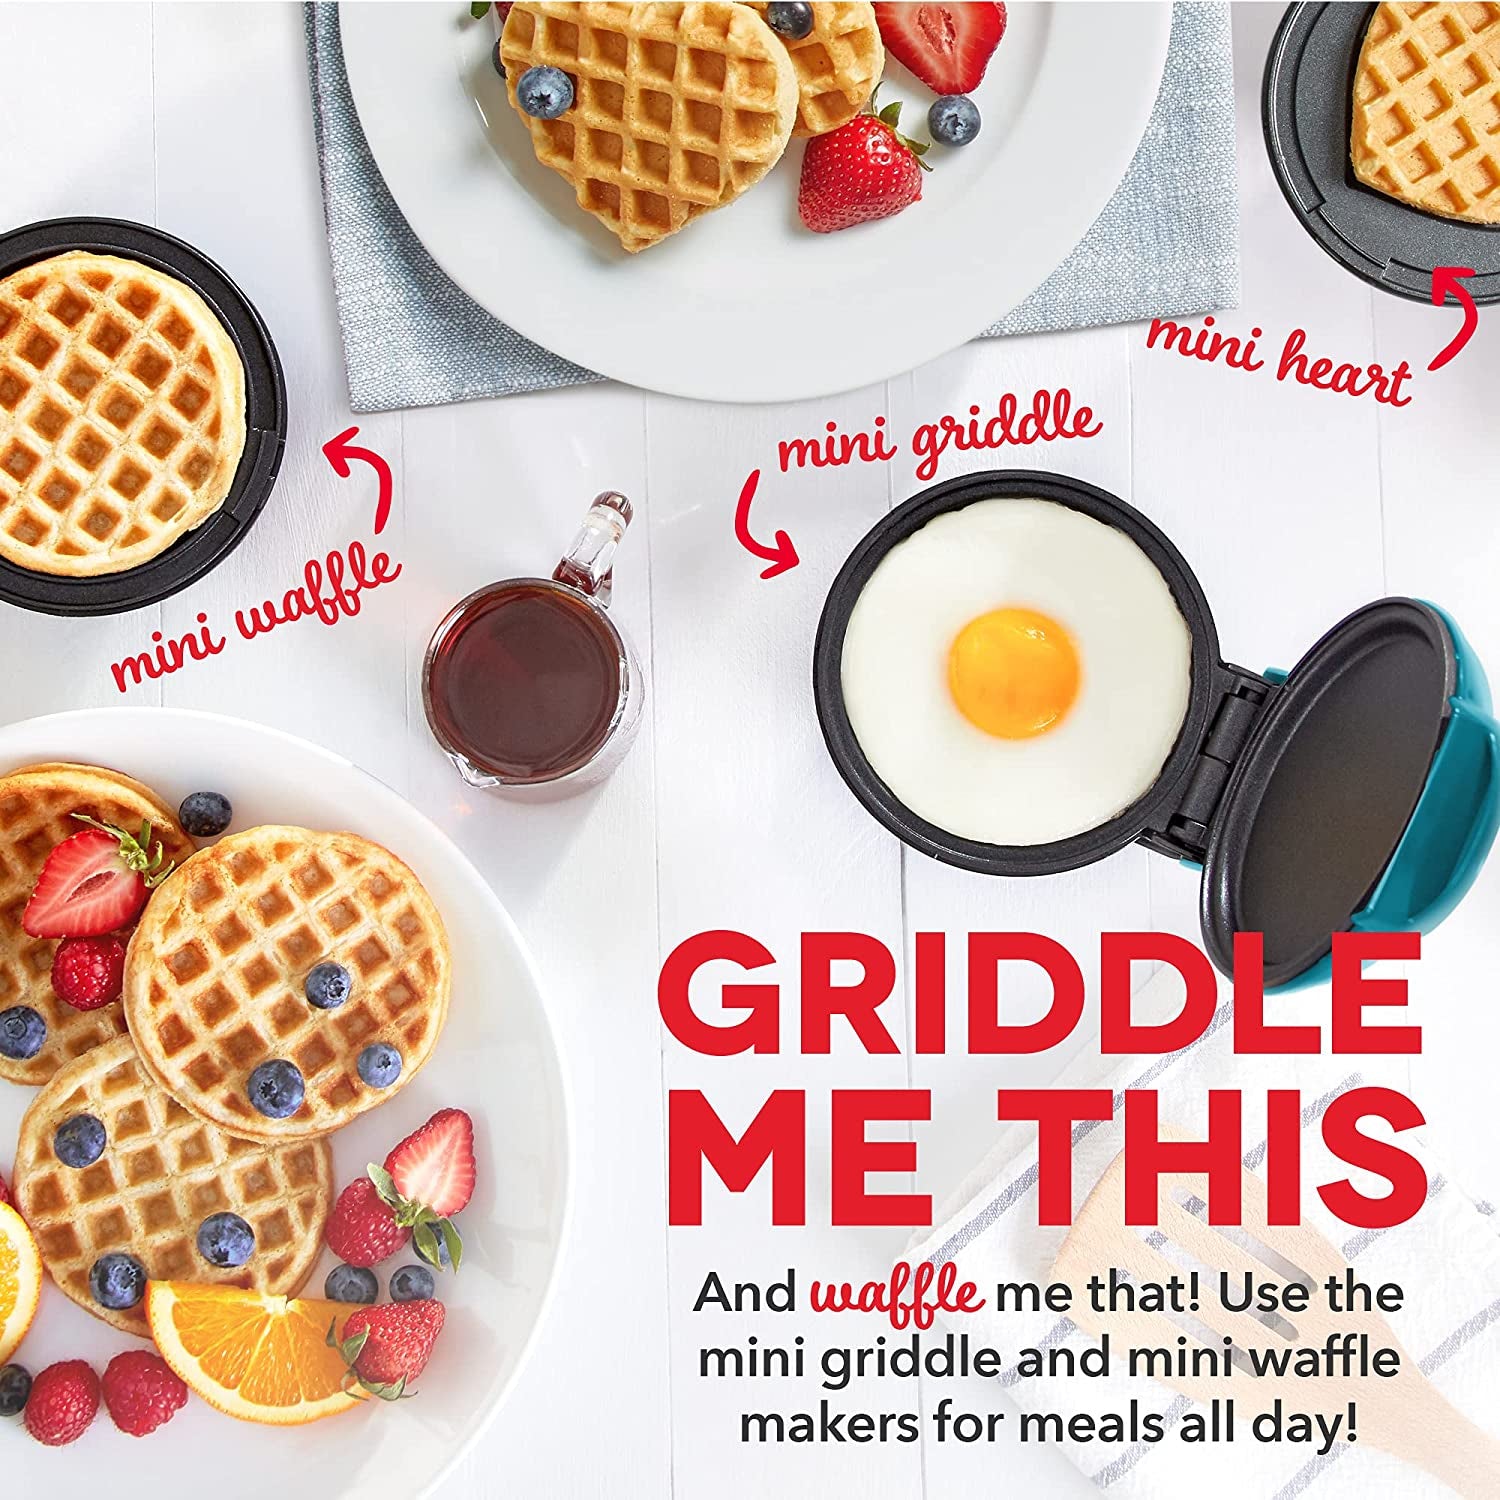 "Breakfast Bliss: Mini Maker 3-Pack Gift Set with Waffle Maker, Heart-Shaped Waffle Maker, and Griddle"